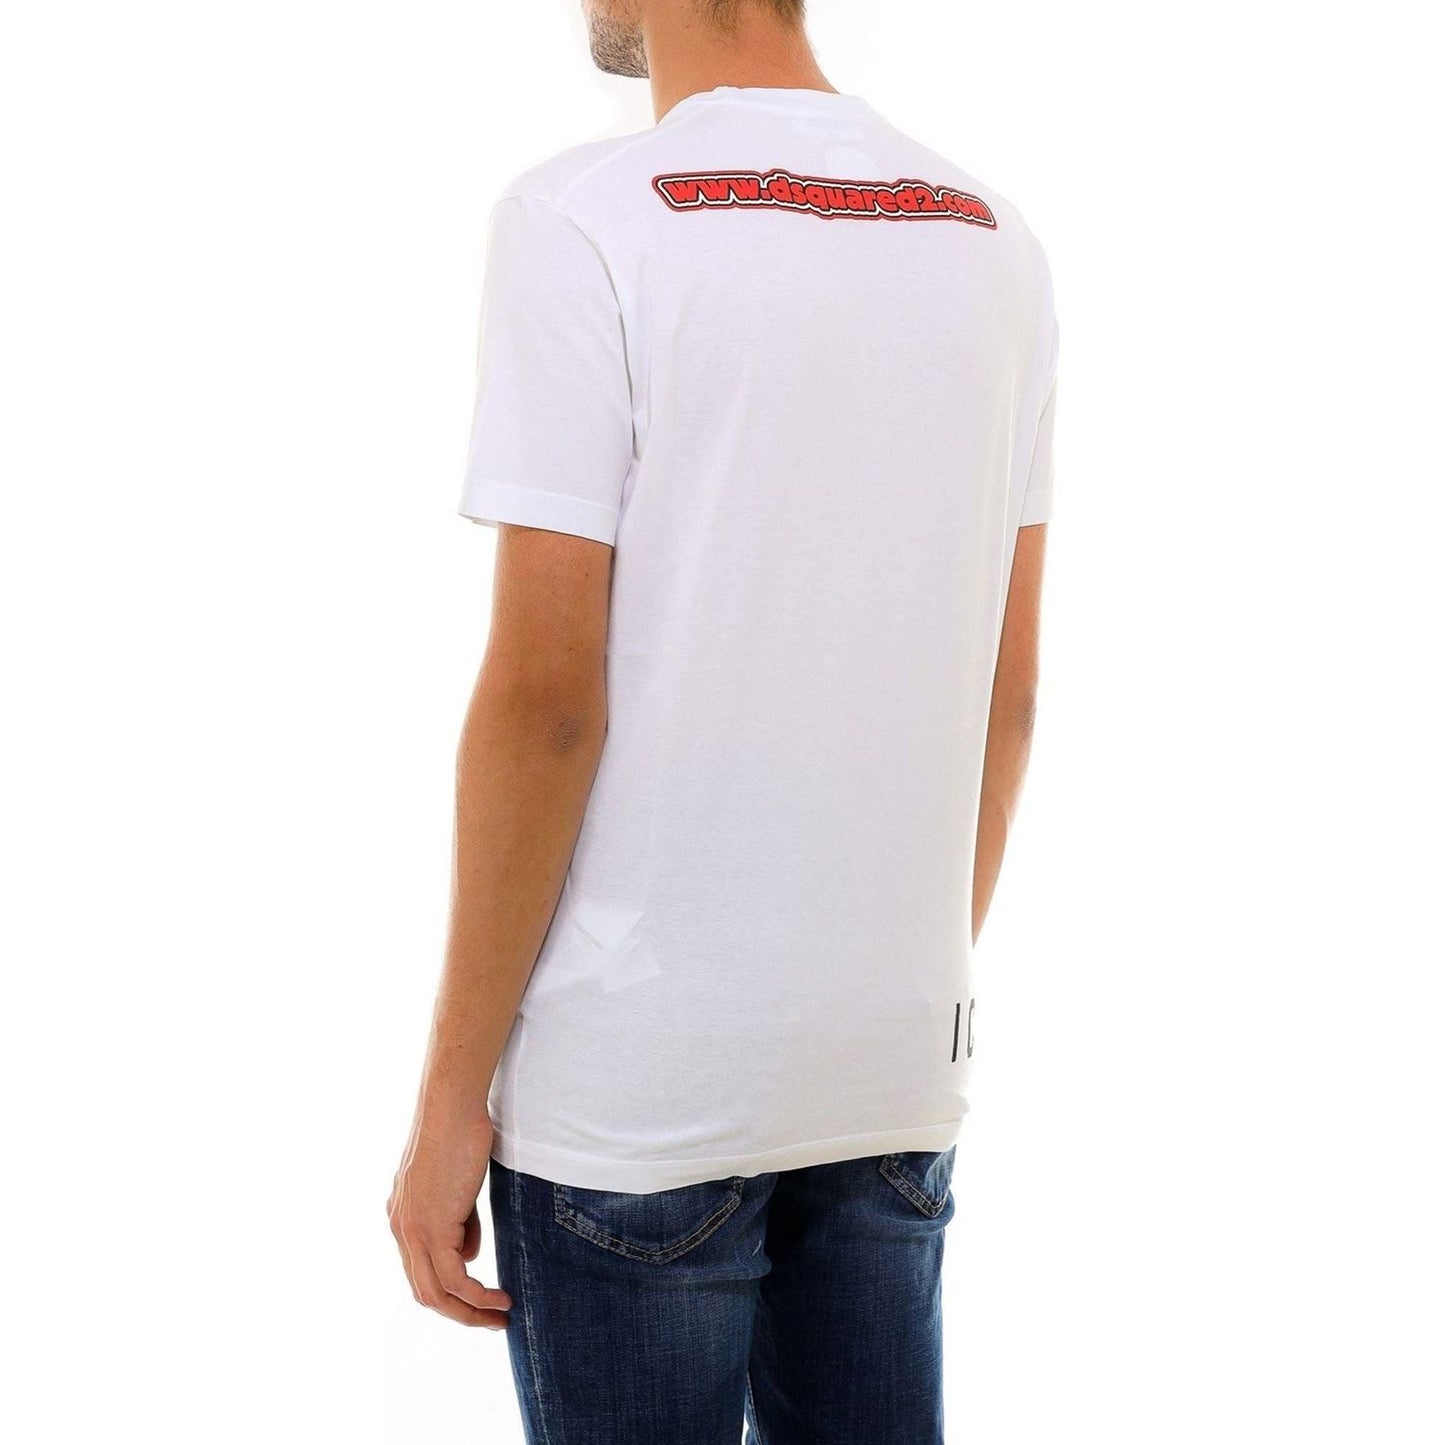 Dsquared² Elevated White Cotton Roundneck T-Shirt s-dsquared-t-shirt-1 stock_product_image_6137_1530206857-2-1837ed03-b94.jpg